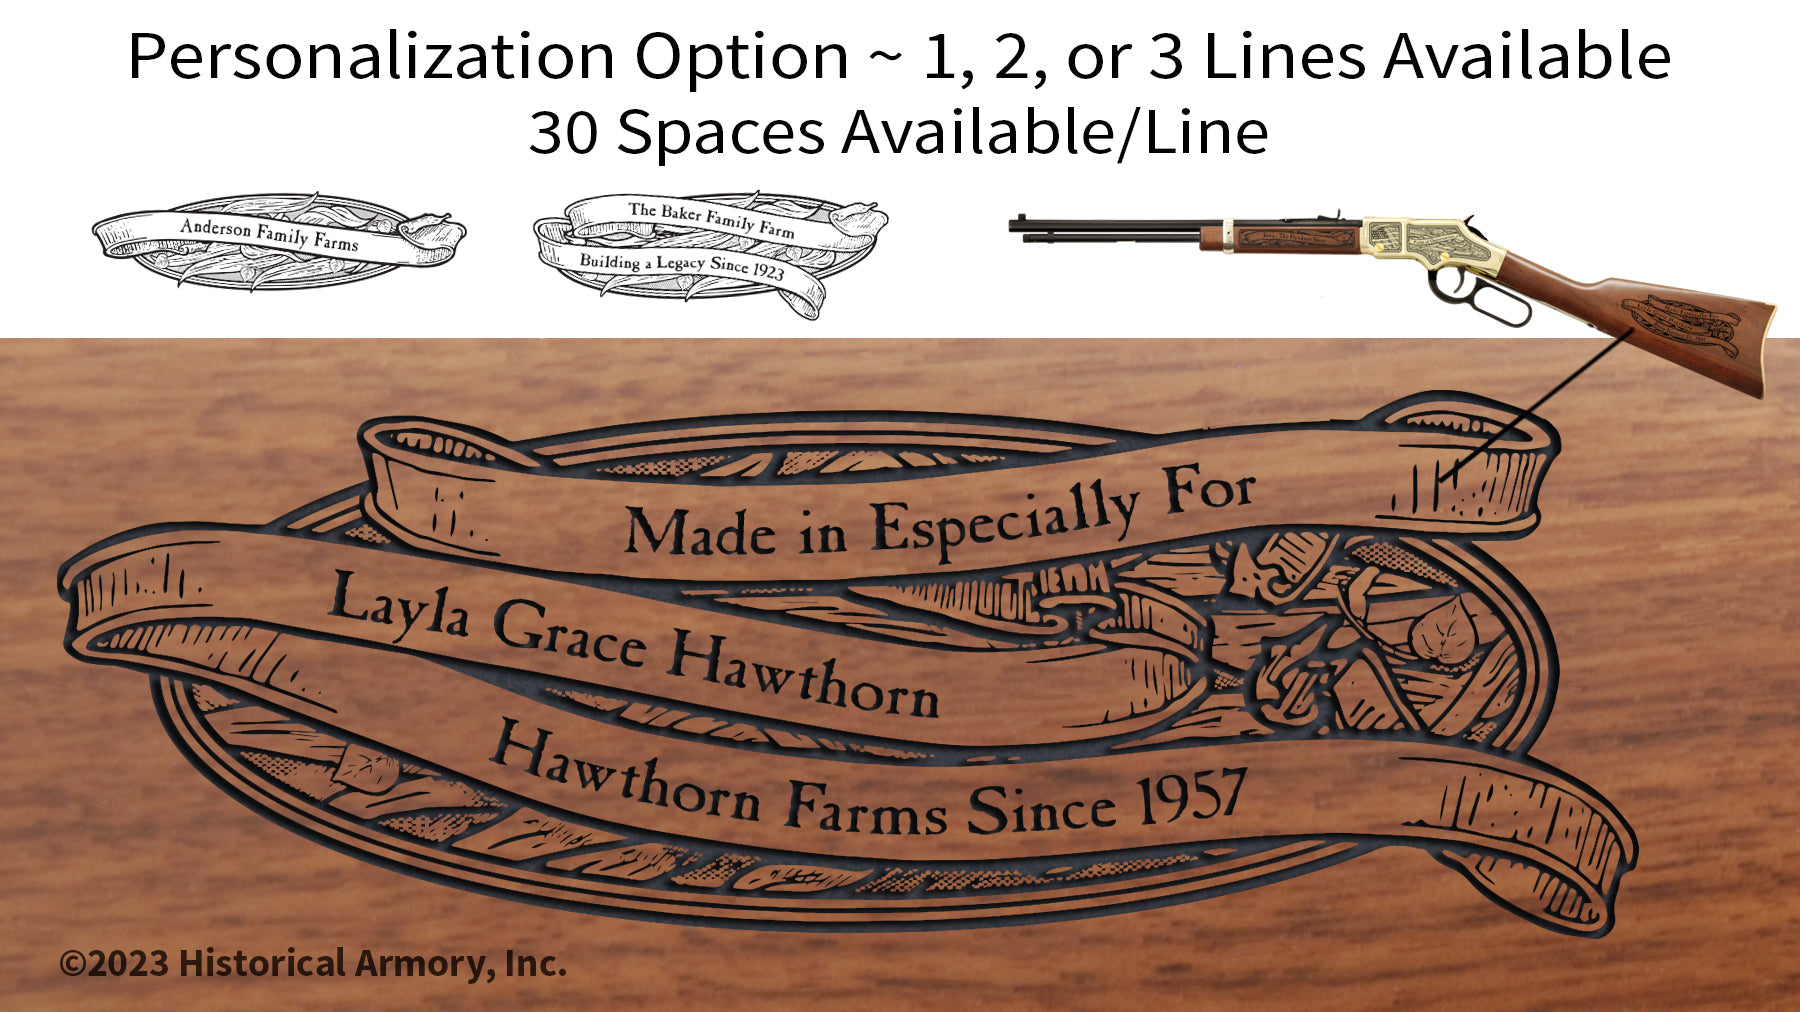 South Dakota Agricultural Heritage Engraved Rifle Personalization